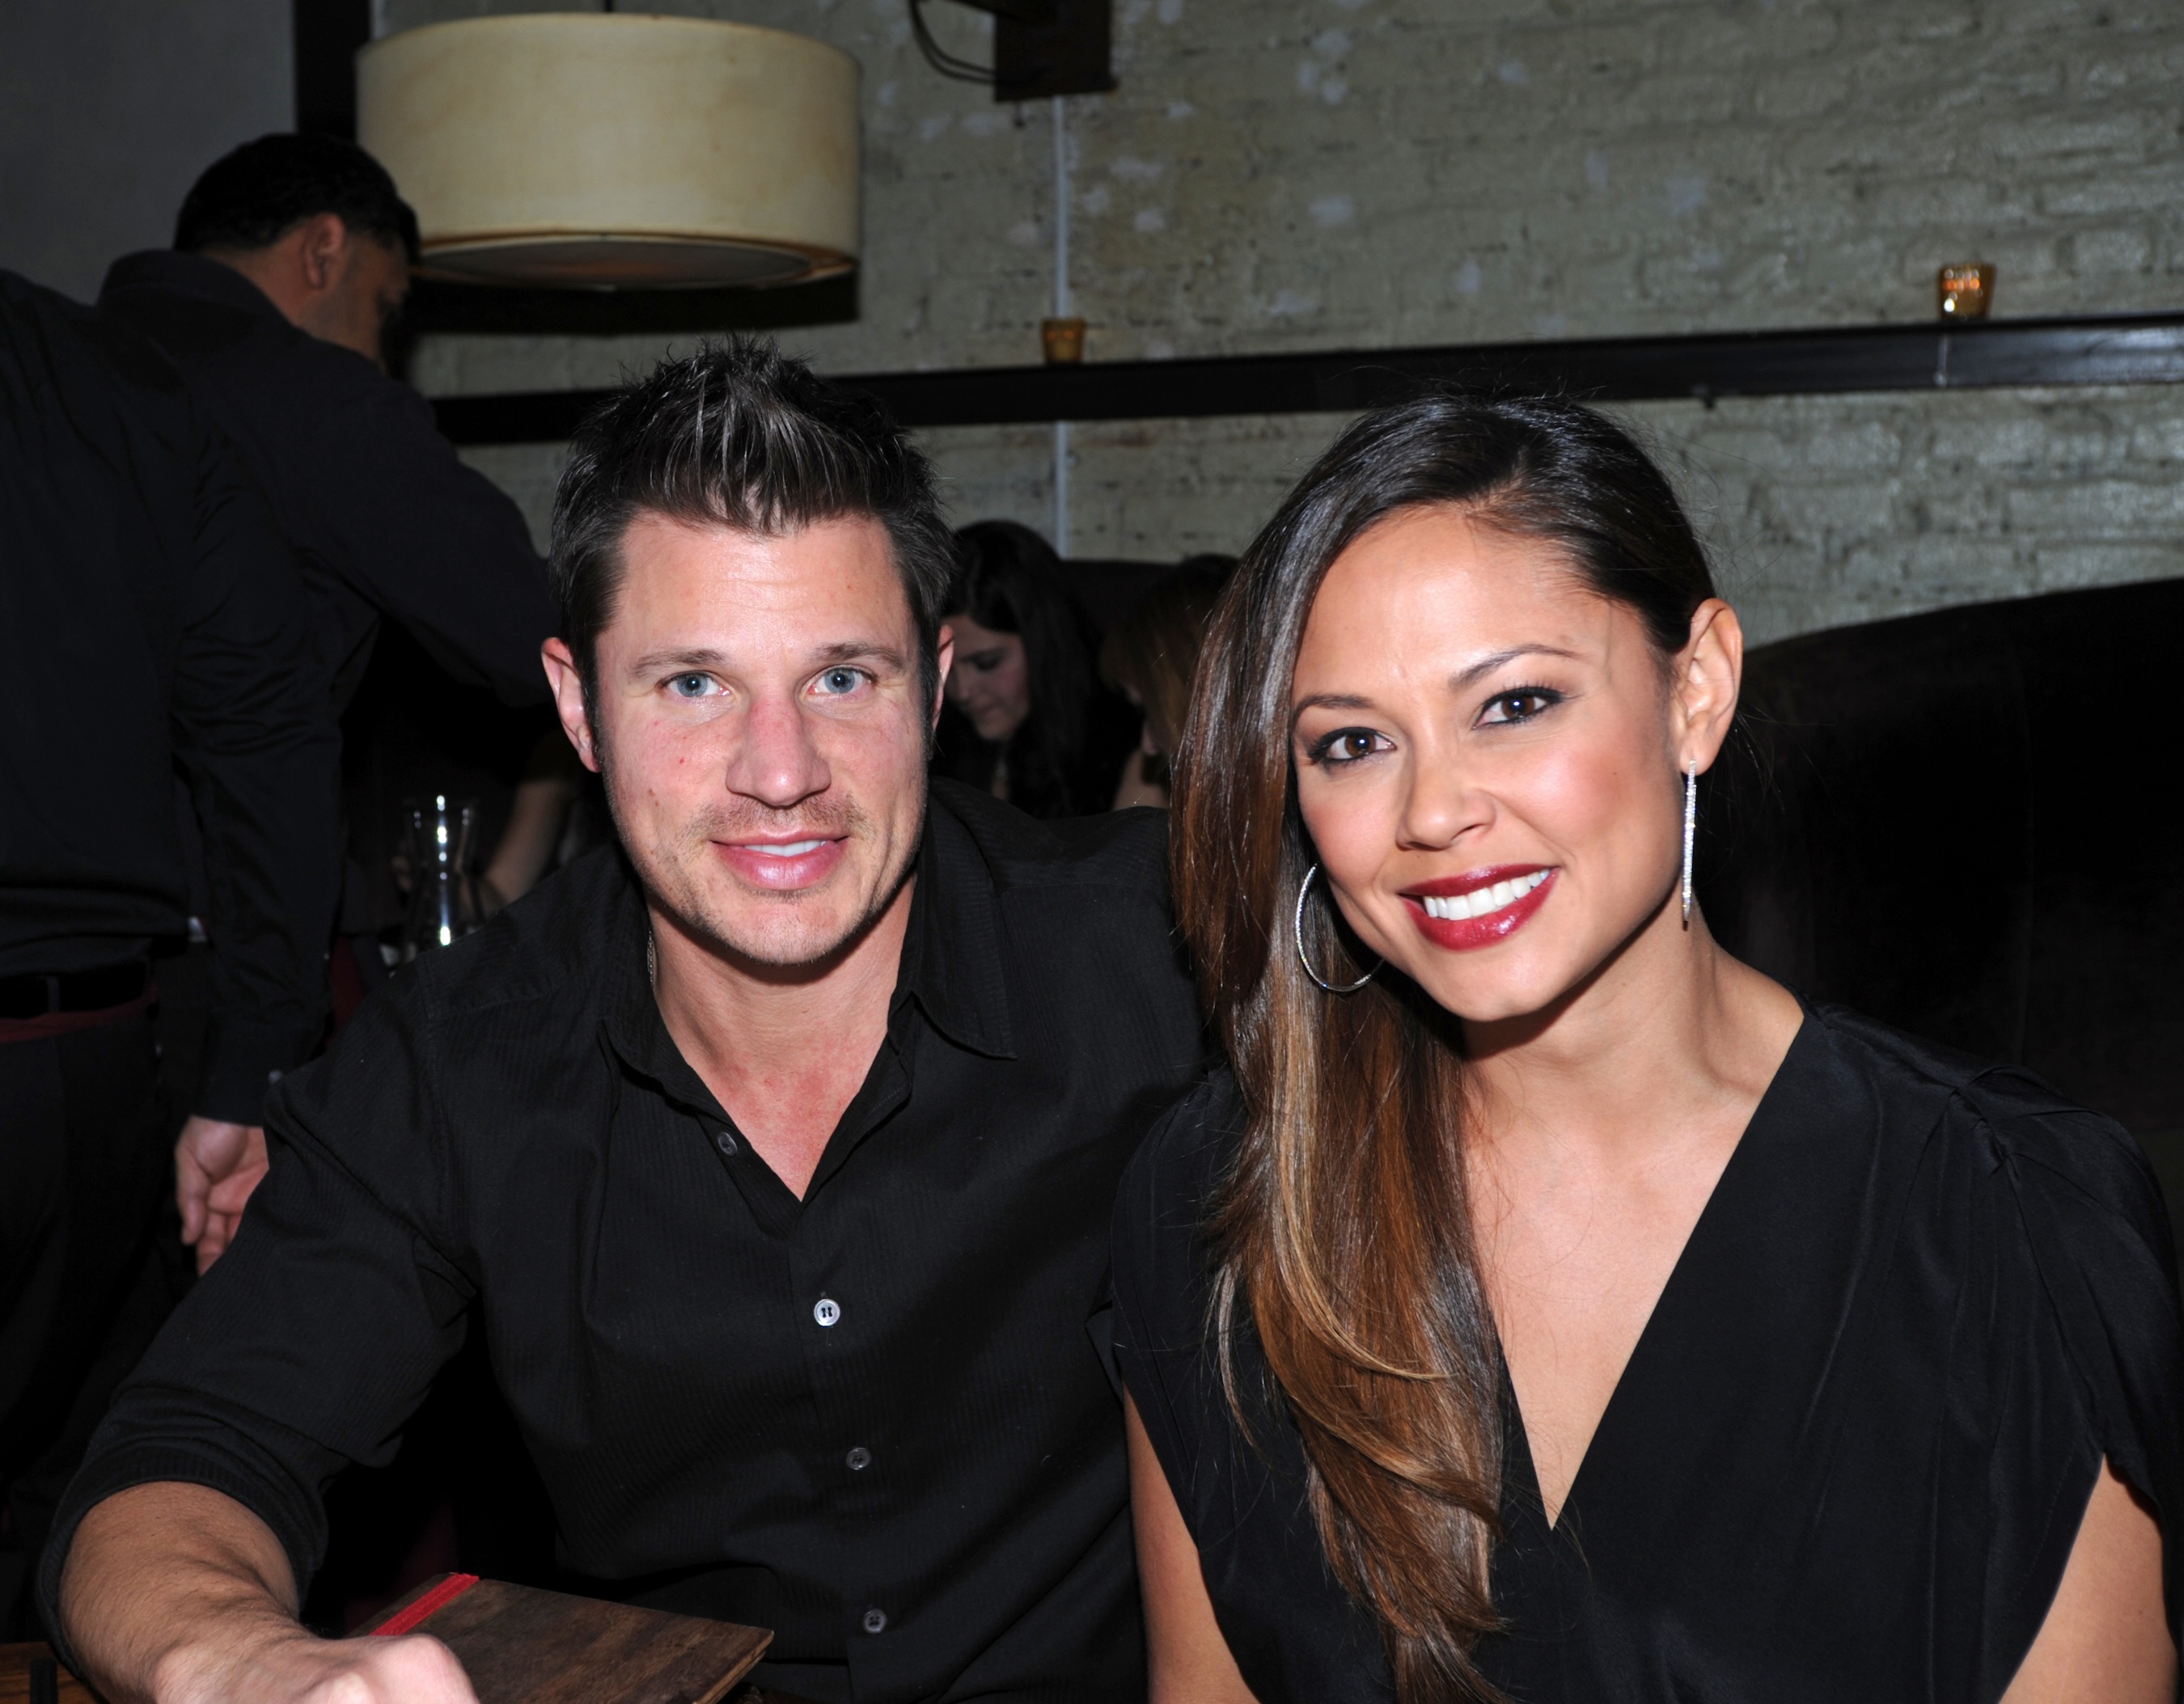 Nick and Vanessa Lachey enjoyed a date night at the Stanton Social in New York City on Mar. 26, 2014.